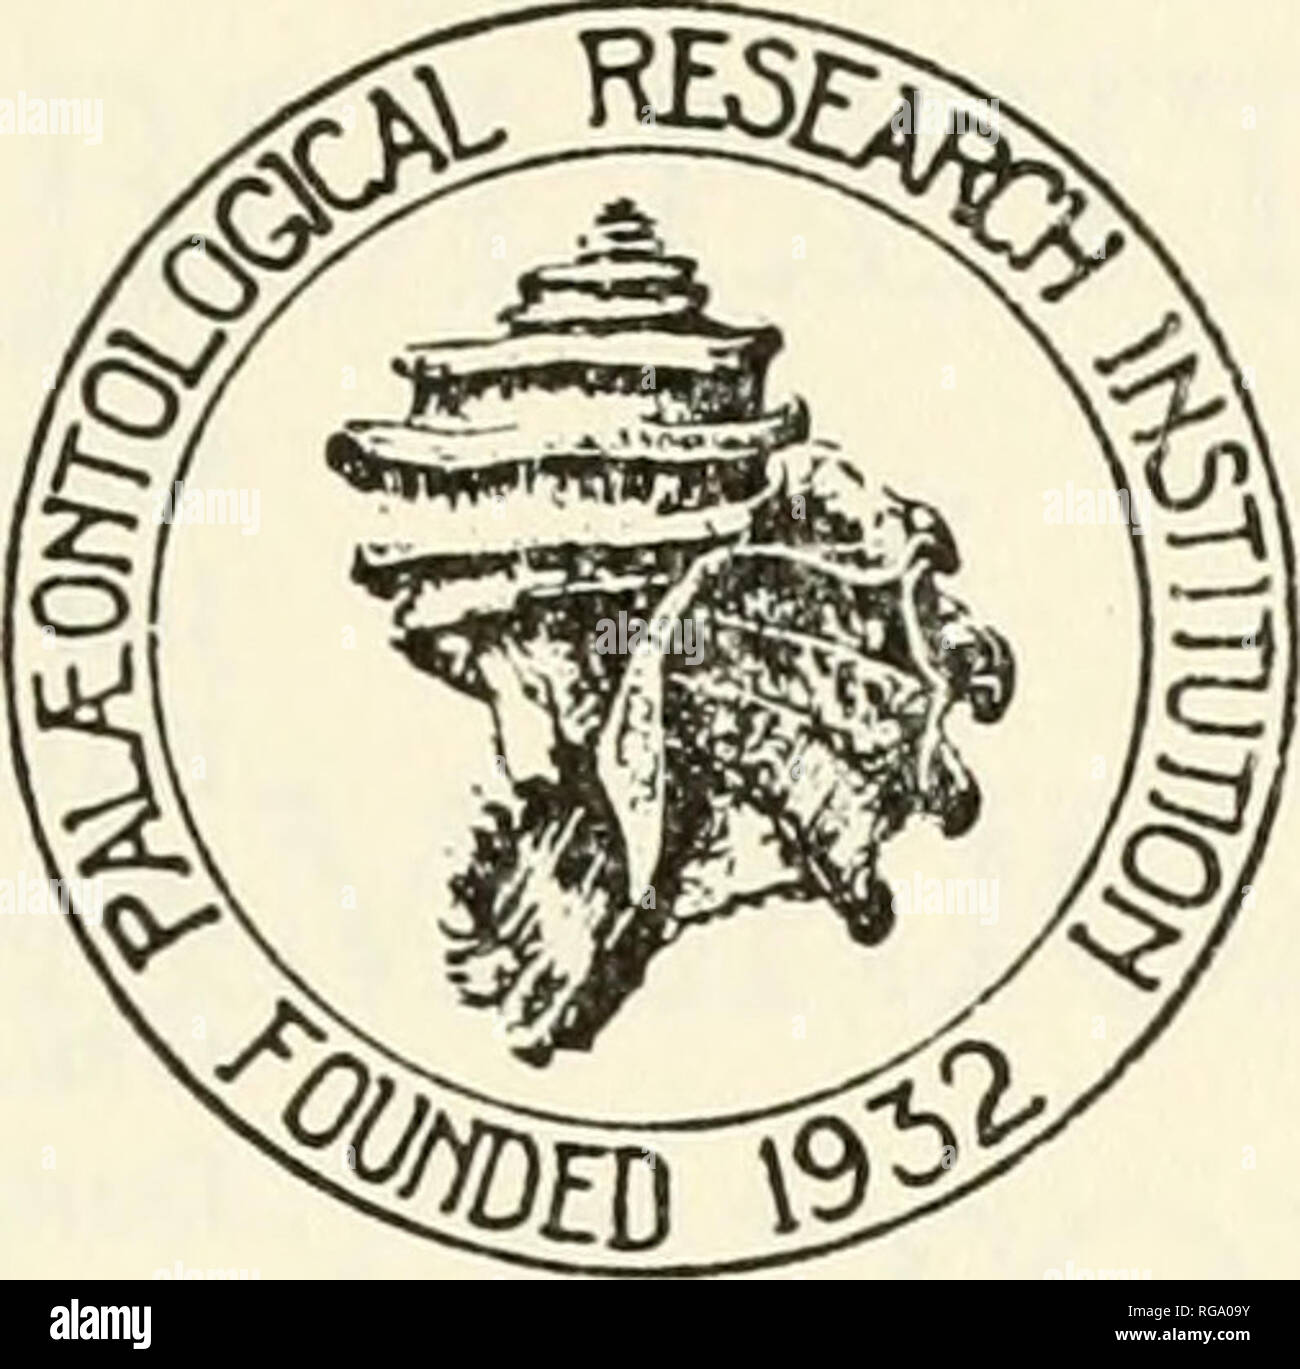 . Bulletins of American paleontology. . -Bui The Paleontological Research Institution acknowledges with special thanks the contributions of the following individuals and institutions PATRONS ($1000 or more at the discretion of the contributor) Armand L. Adams (1976) James A. Allen (1967) American Oil Company (1976) Atlantic Richfield Company (1978) Miss Ethel Z Bailey (1970) Christina L. Balk (1970) Mr. &amp; Mrs. Kenneth E. Caster (1967) Chevron Oil Company (1978) Exxon Company (1977 to date) Lois S. Fogelsancer (1966) Gulf Oil Corporation (1978) Merrill W. Haas (1975) Miss Rebecca S. Harris  Stock Photo